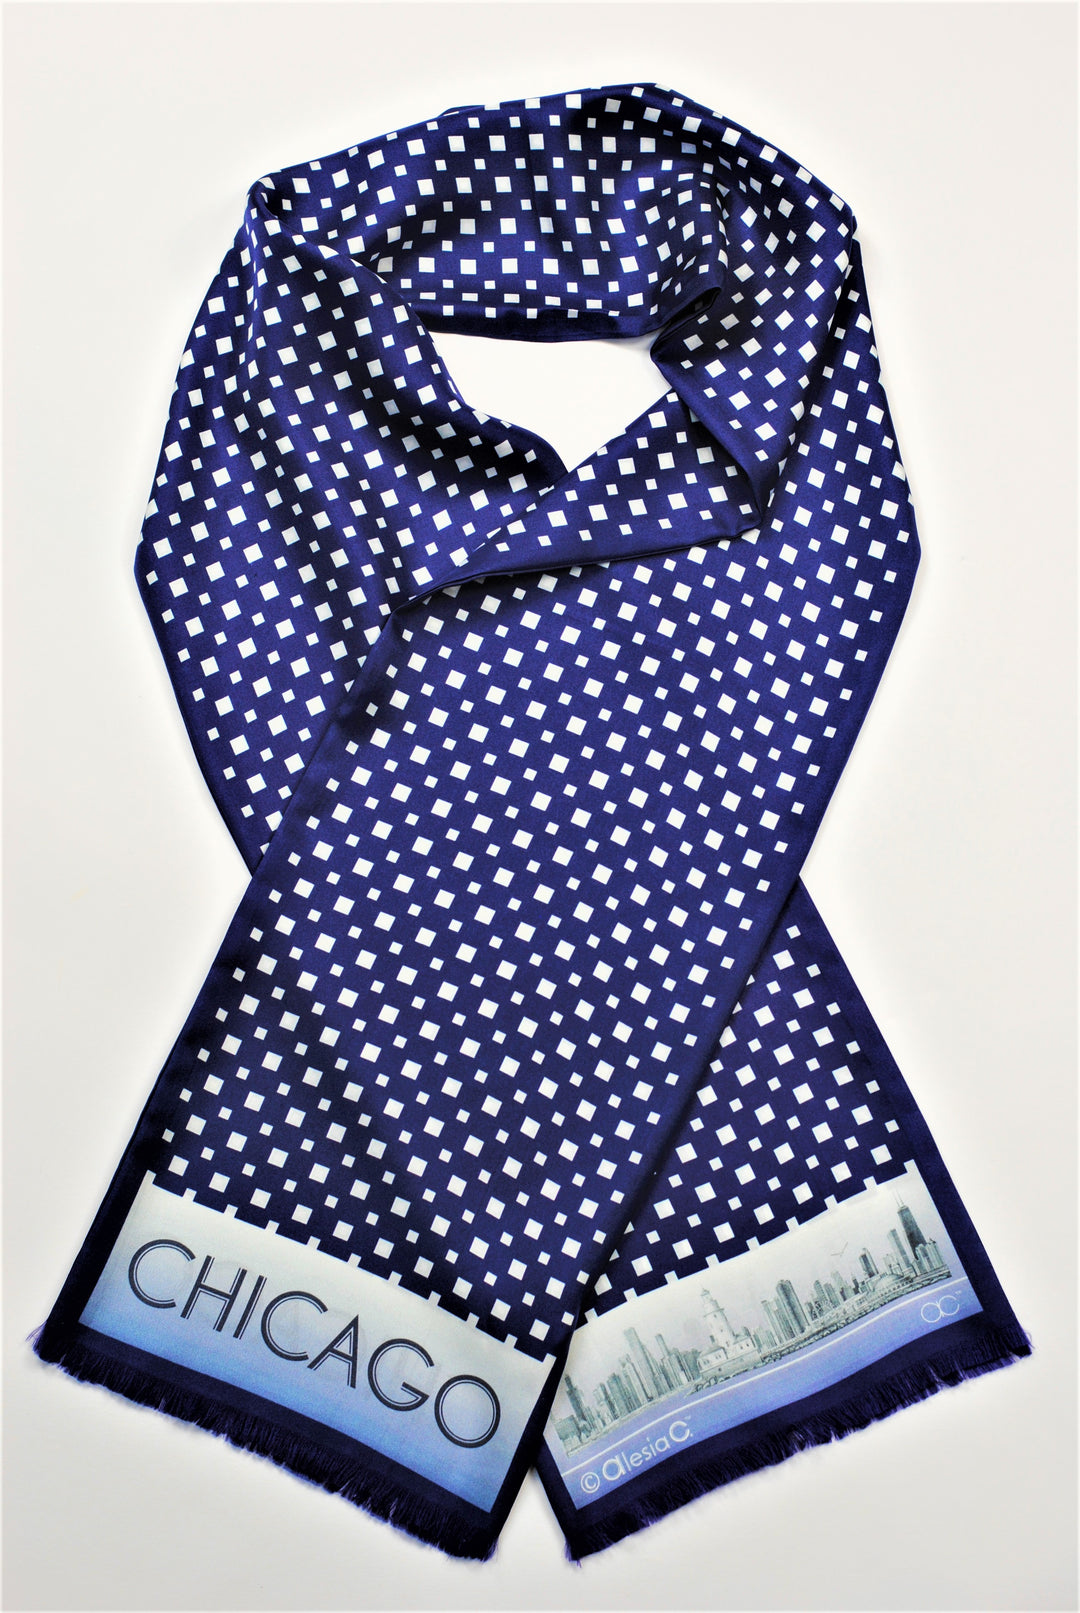 CHICAGO Skyline Art Pure Double Silk Scarf Navy Blue White Long by Alesia Chaika